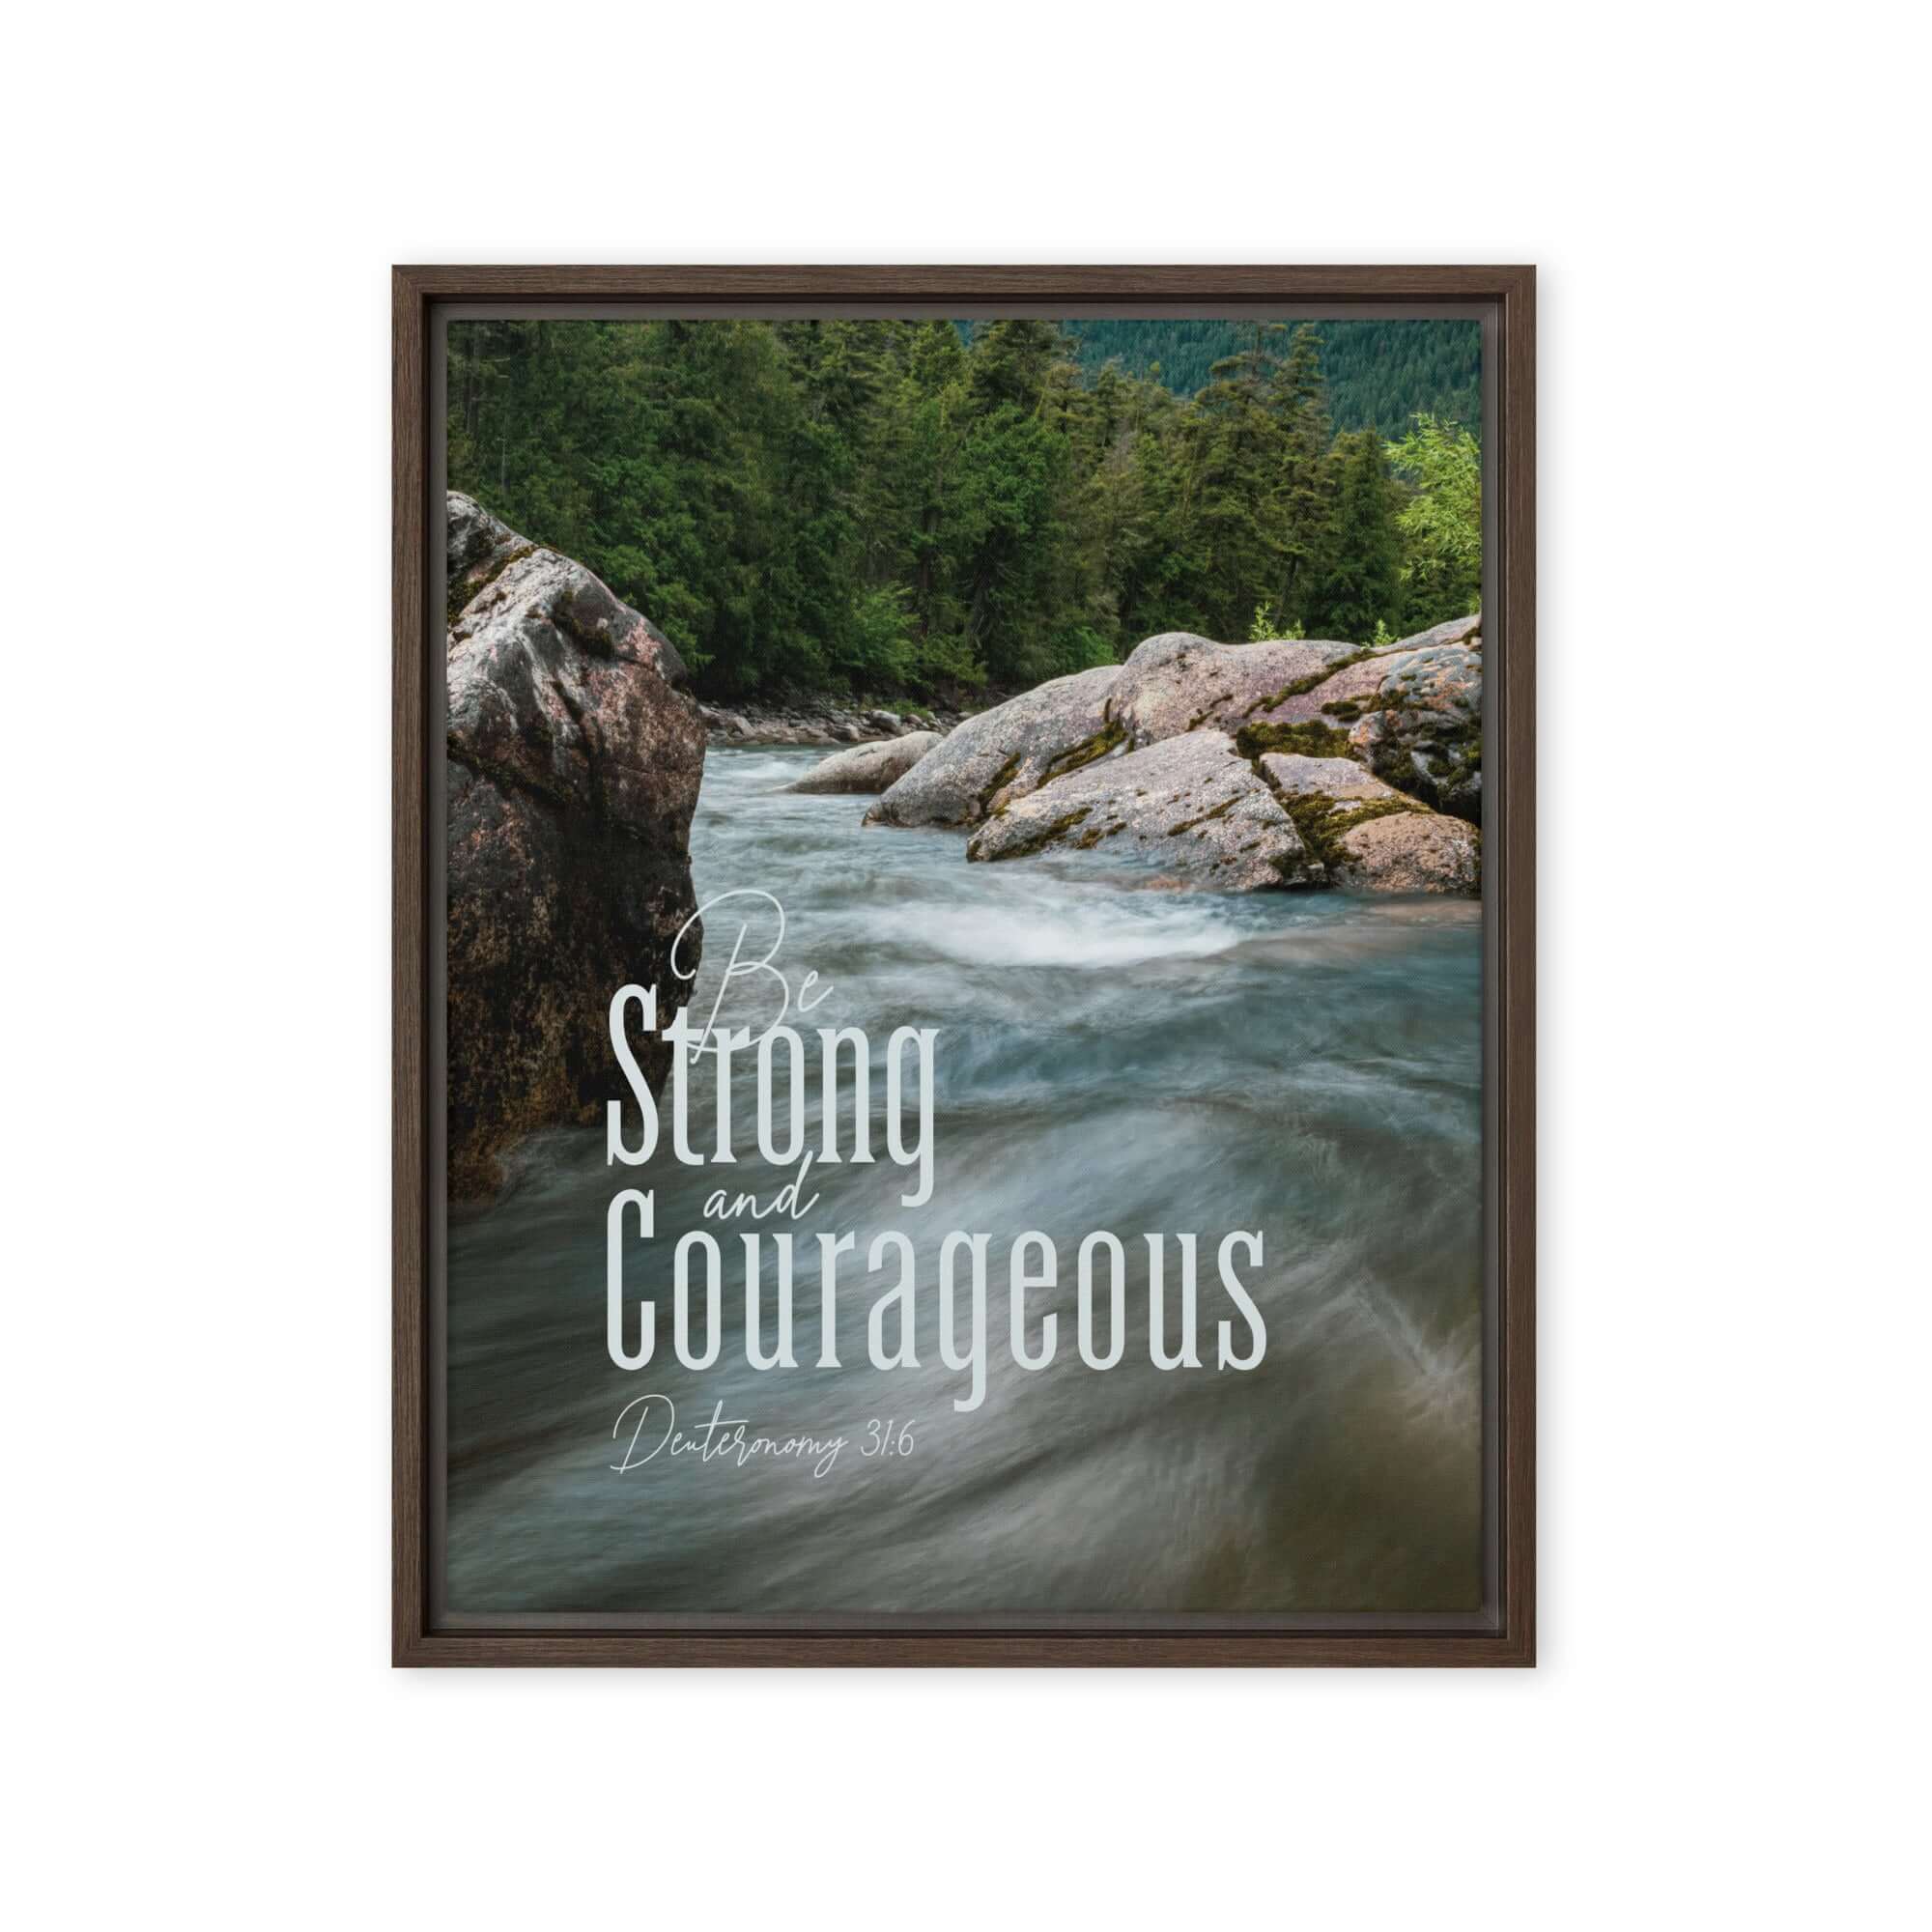 Deut 31:6 - Bible Verse, Be strong and courageous Framed Canvas